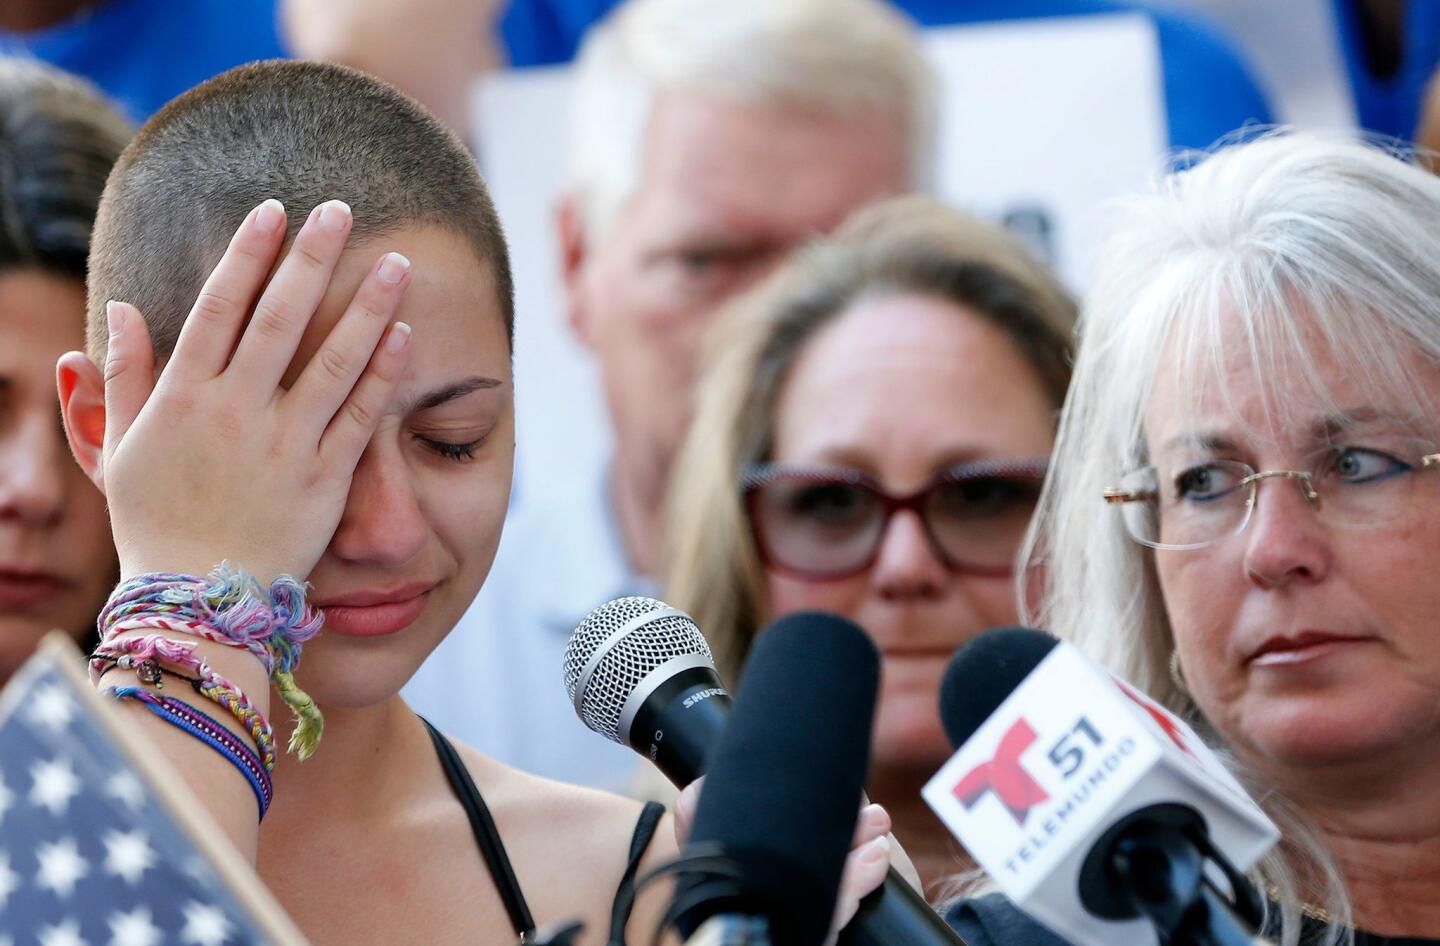 Marjory Stoneman Douglas High School student Emma Gonzalez reacts during her speech at a rally for gun control at the Broward County Federal Courthouse in Fort Lauderdale, Fla. on Feb. 17, 2018. "To every politician taking donations from the NRA, shame on you!" Gonzalez said.